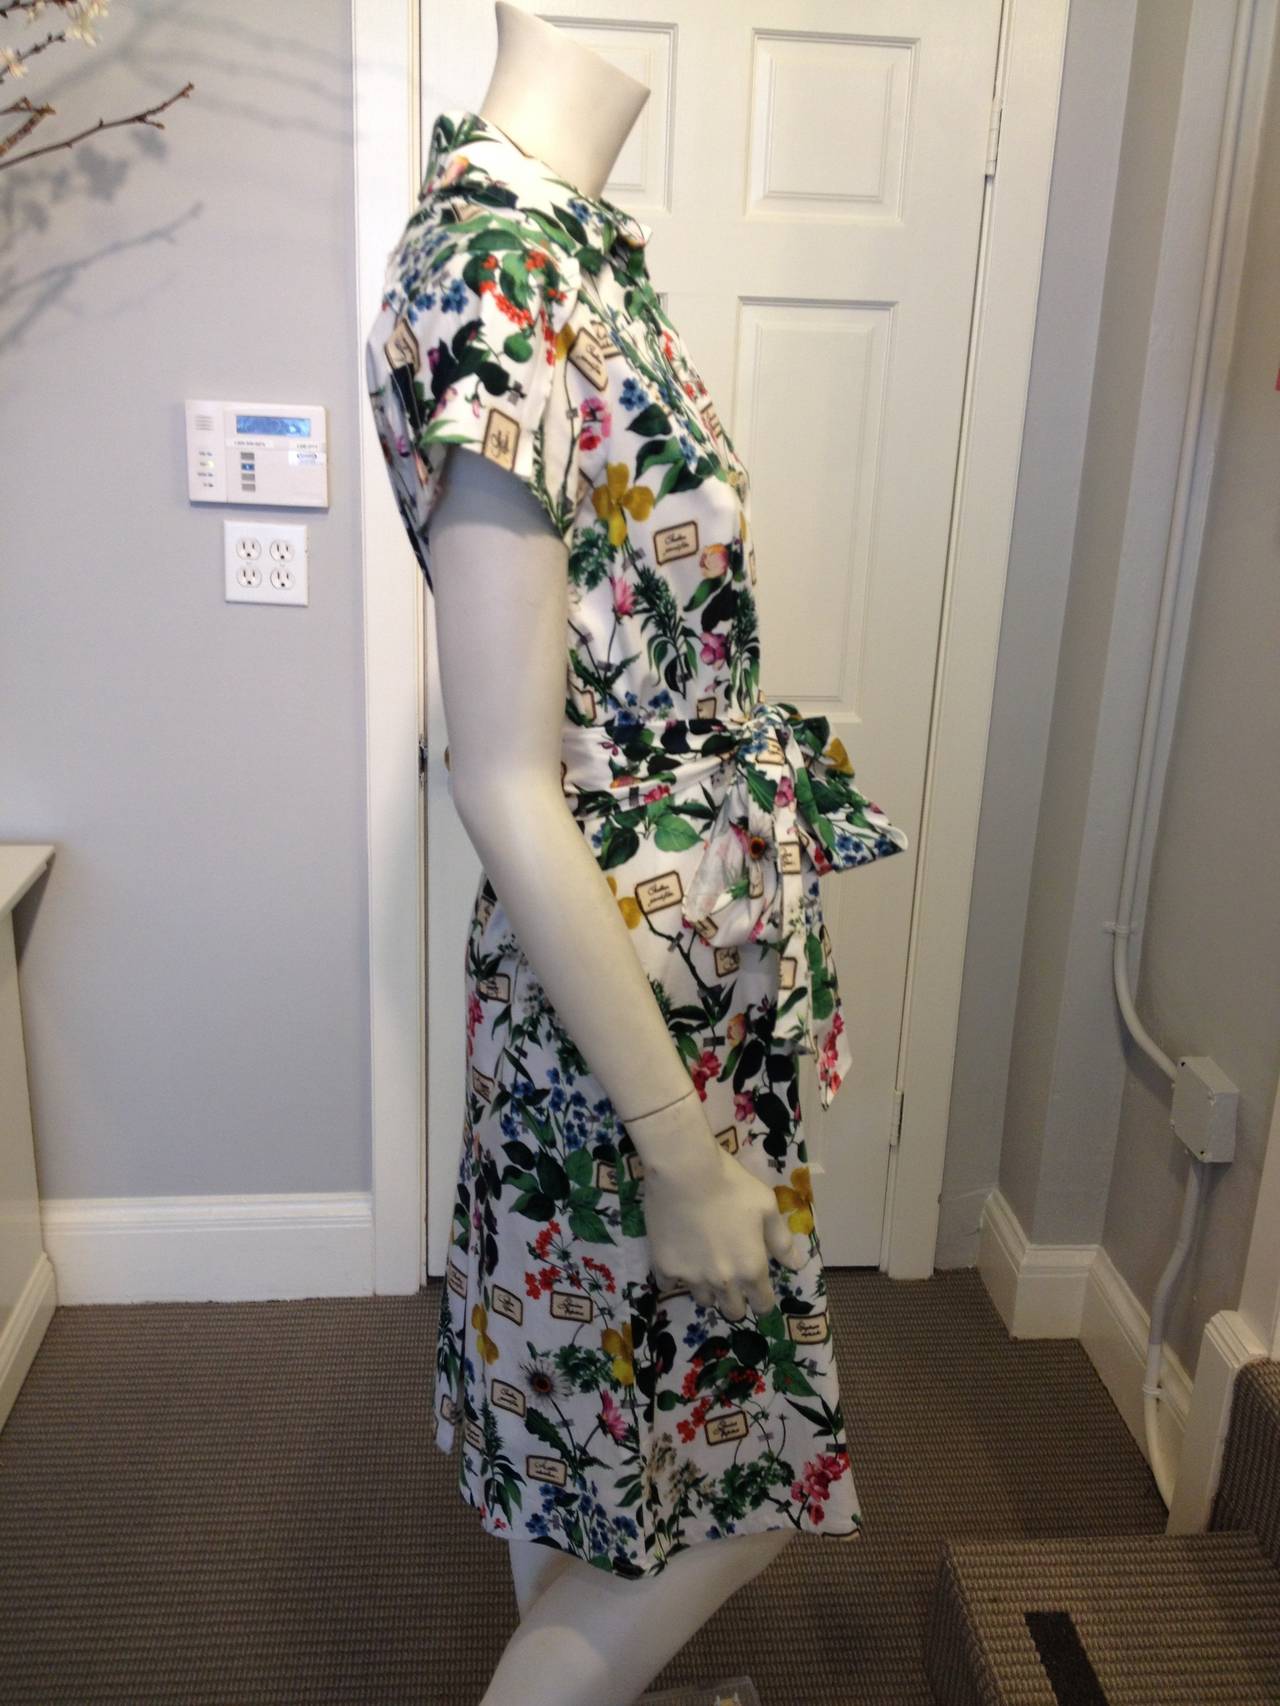 This charming Carolina Herrera dress takes spring florals a step further with its print of an entire collage of trompe l'oeil flowers and foliage that look like they're taped to the fabric, each beside its own label. It  buttons down the front like